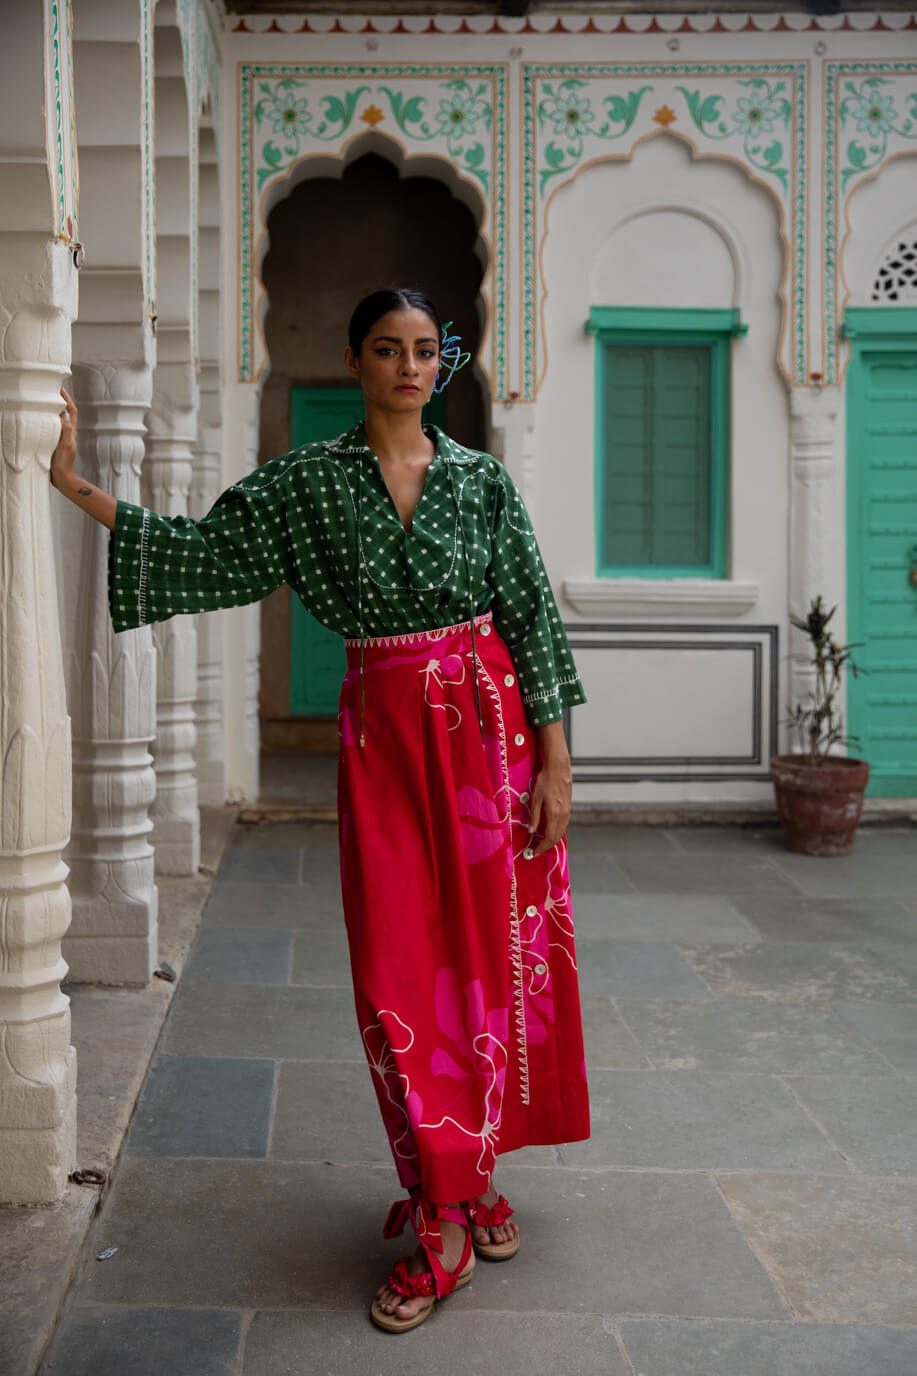 the-jodi-life-handcrafted-pink-red-floral-gurhal-skirt